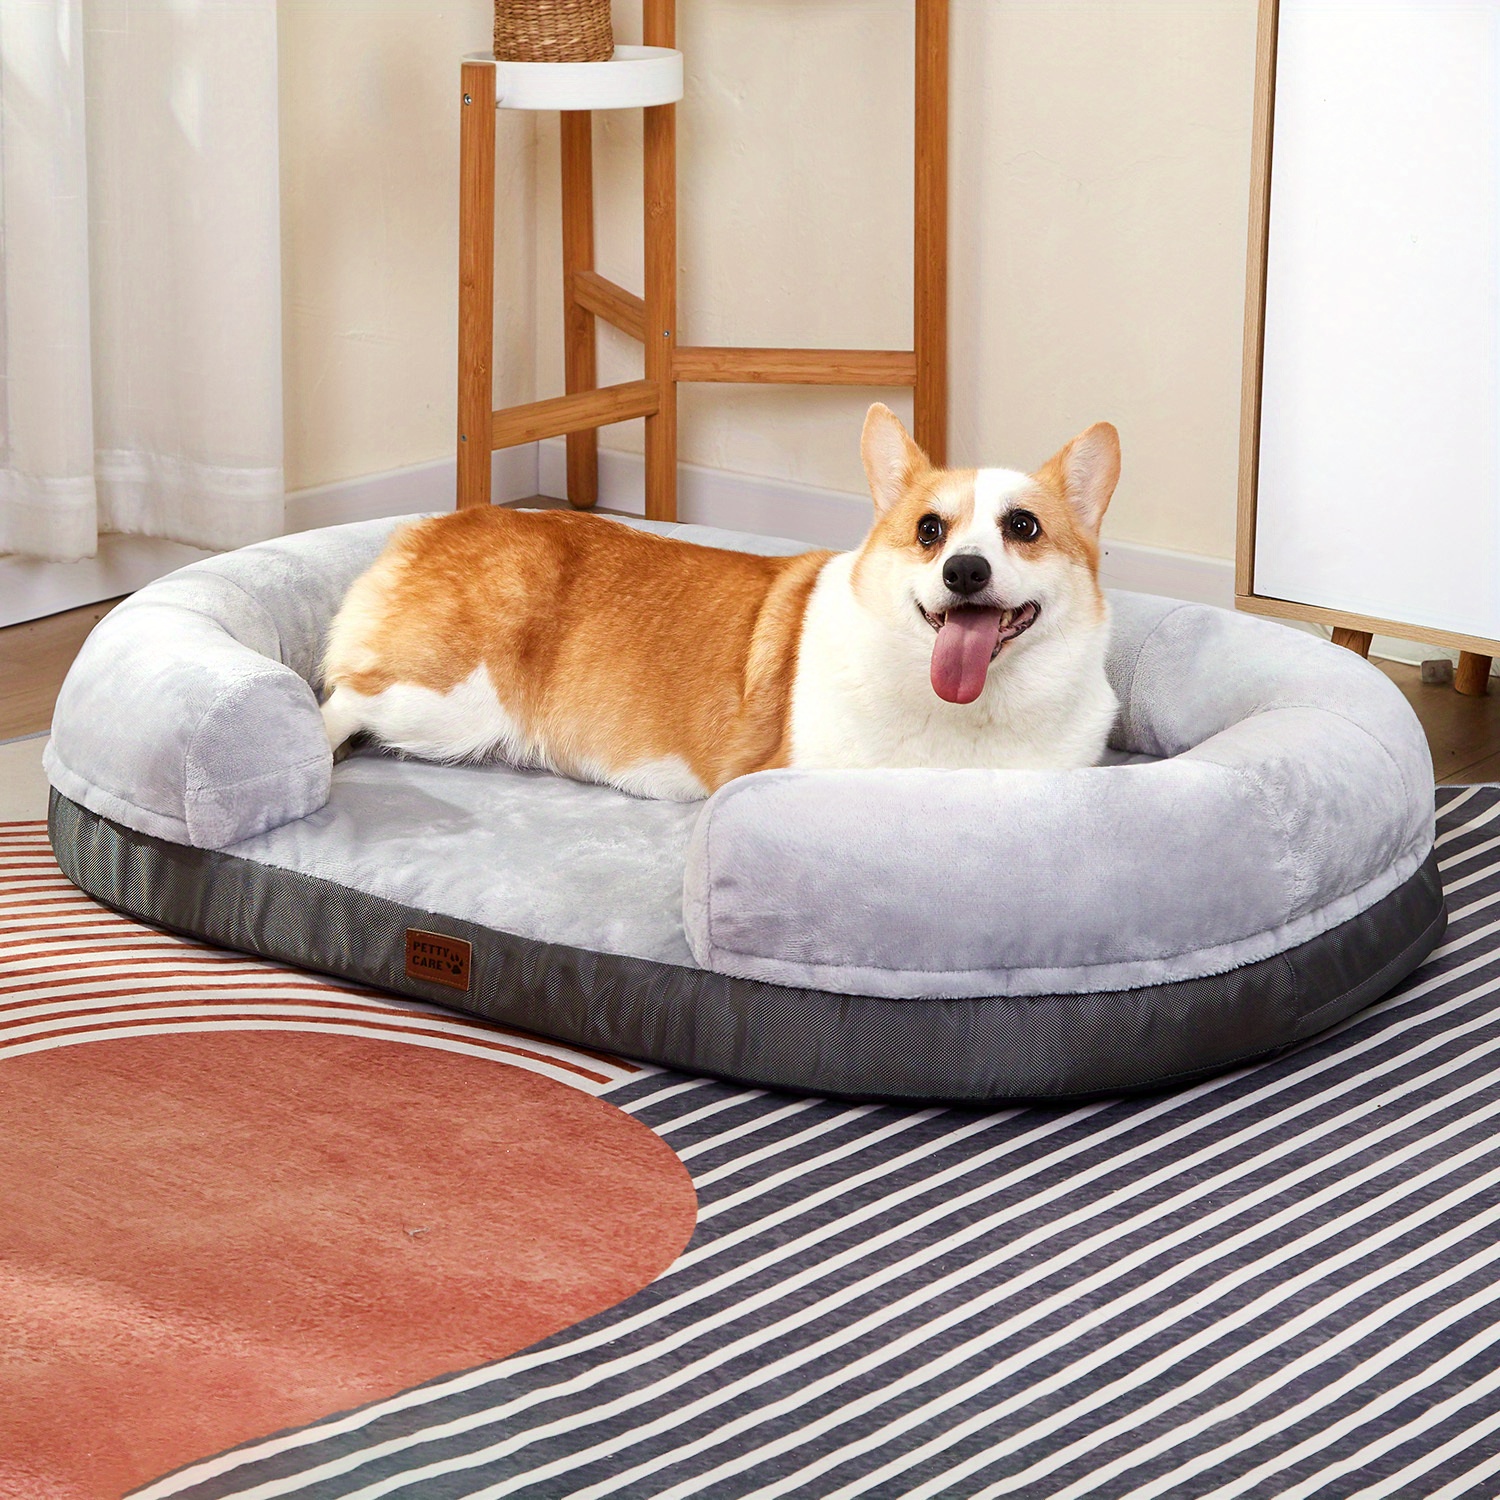 

Pettycare Orthopedic Dog Bed For Medium Dogs With Memory Foam, Waterproof Pet Bed Soft Sofa With Washable Removable Cover Anti-slip Bottom, Extra Head And Neck Support Sleeper